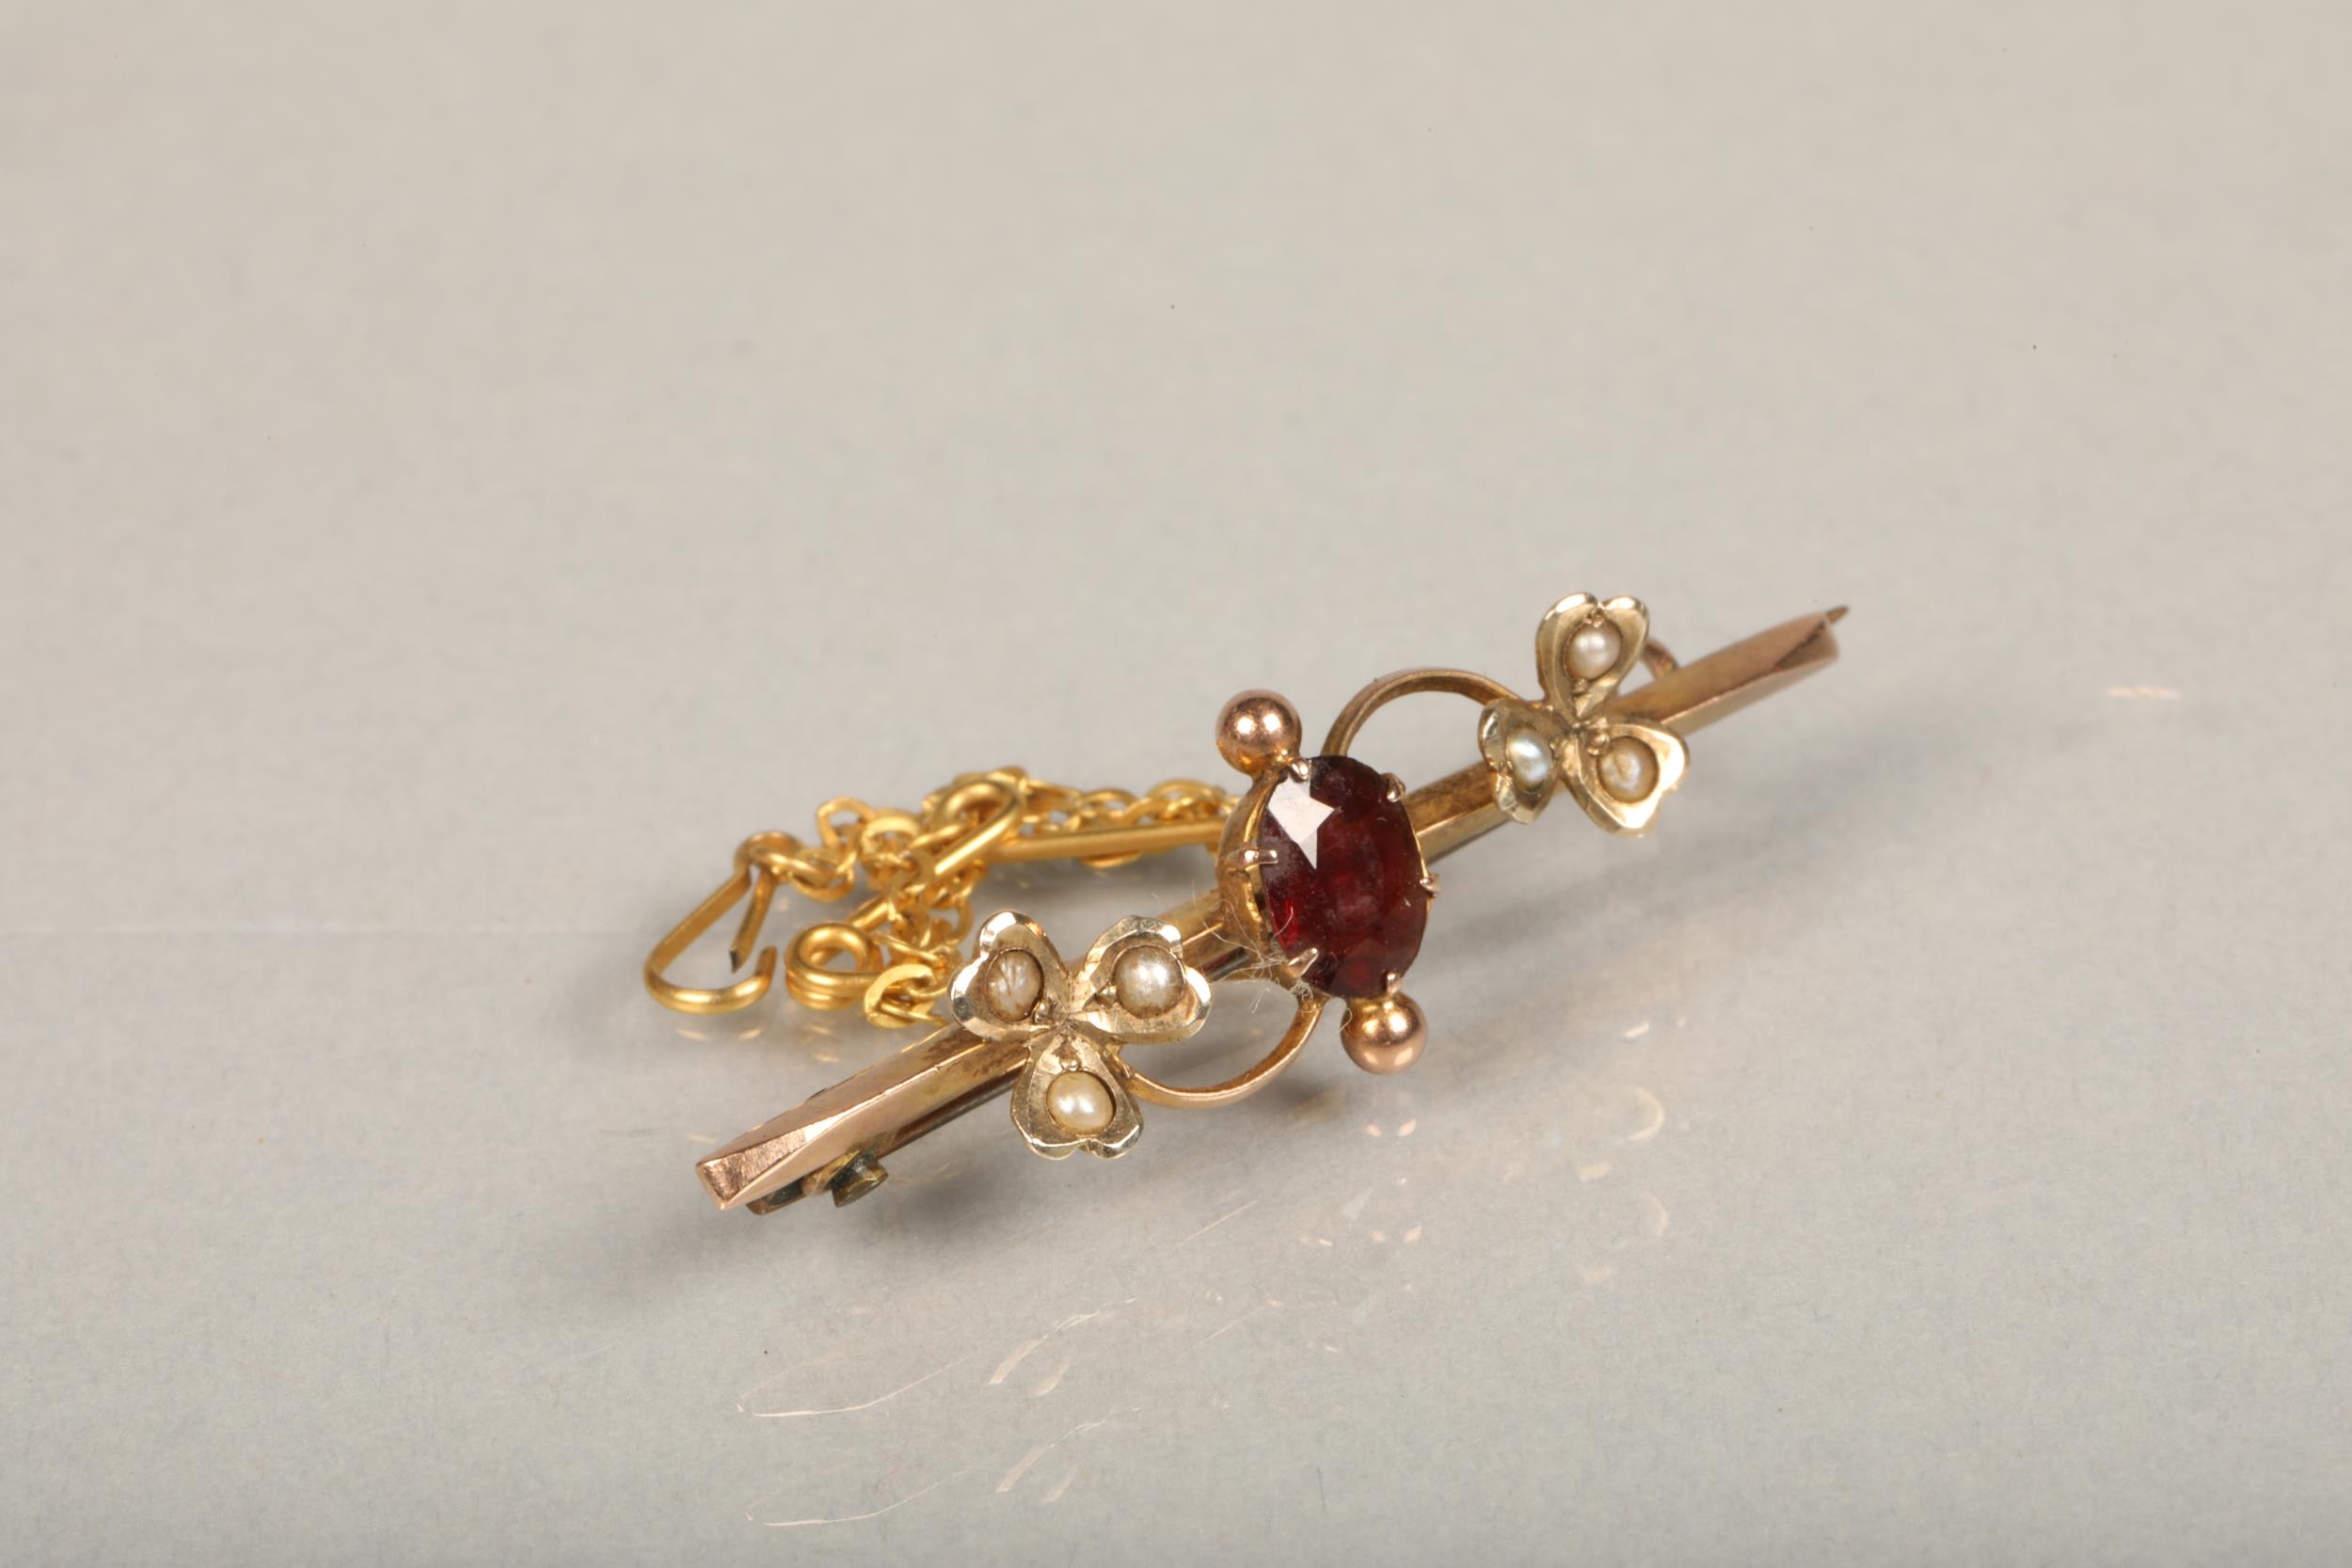 15ct gold amethyst and seed pearl bar brooch, 2.9g, a 9ct gold bar brooch 1.3g, 9ct gold bar - Image 2 of 3